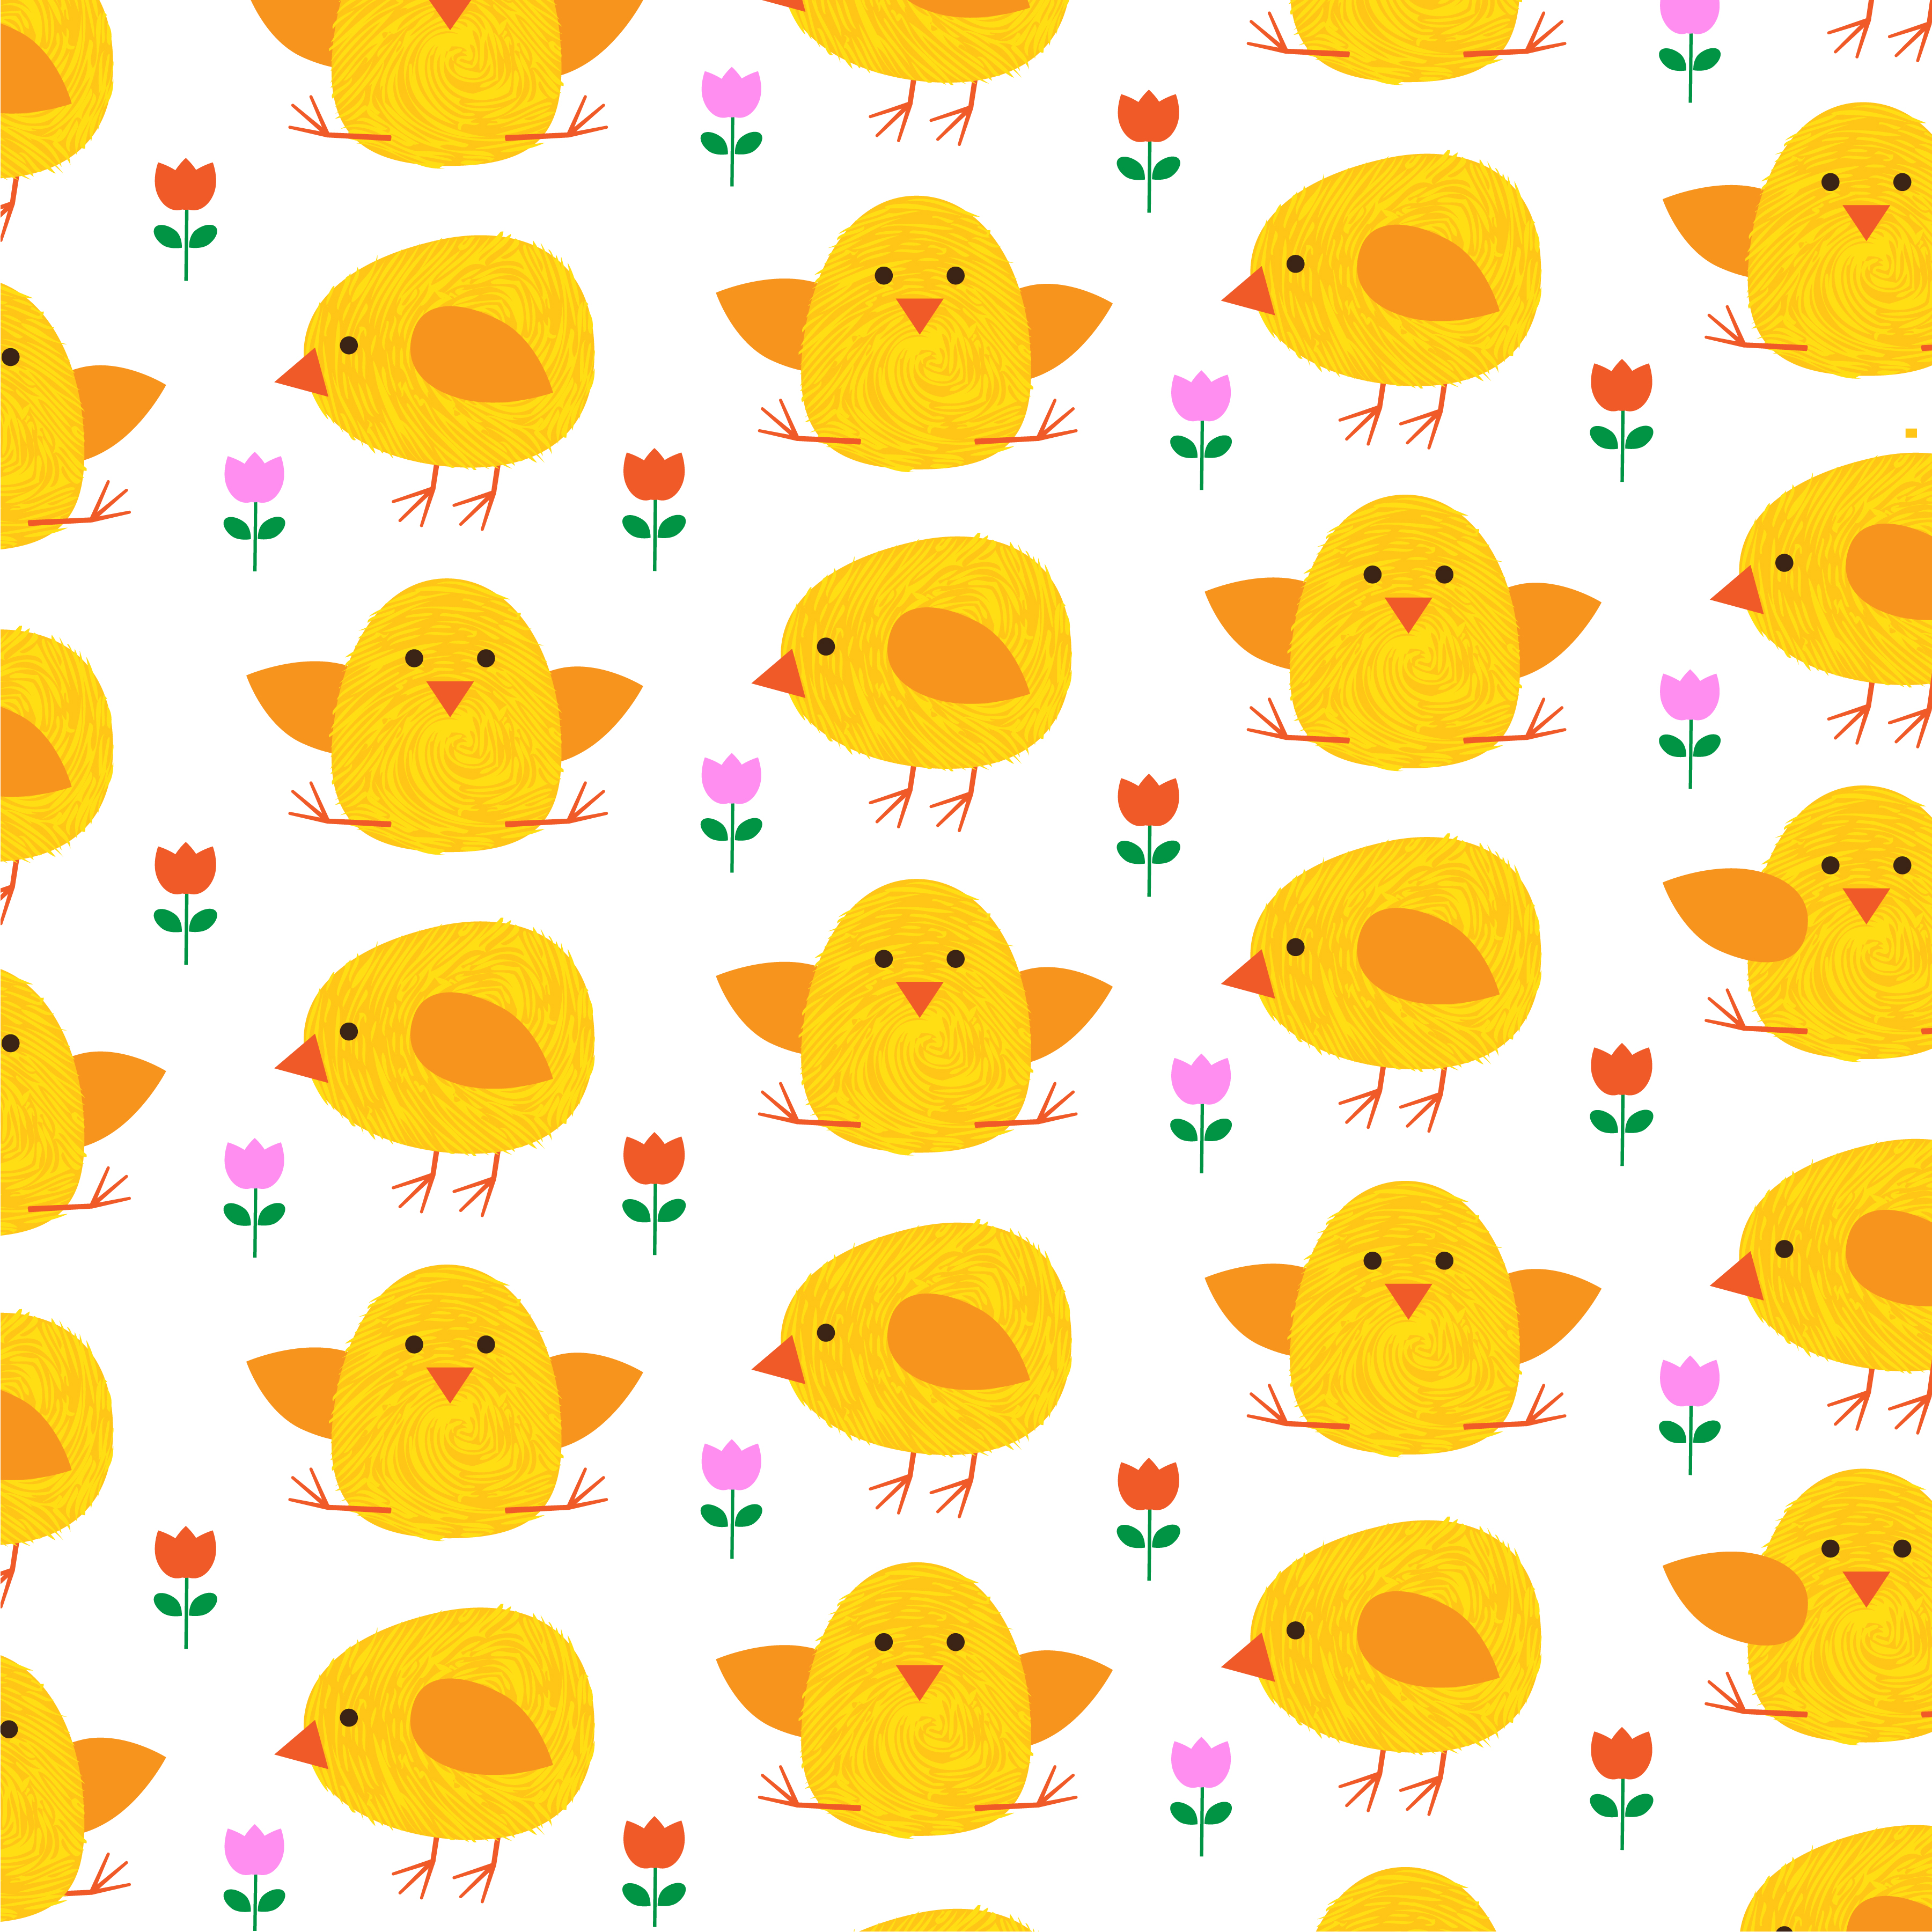 easter-chick-pattern-on-white-333998-download-free-vectors-clipart